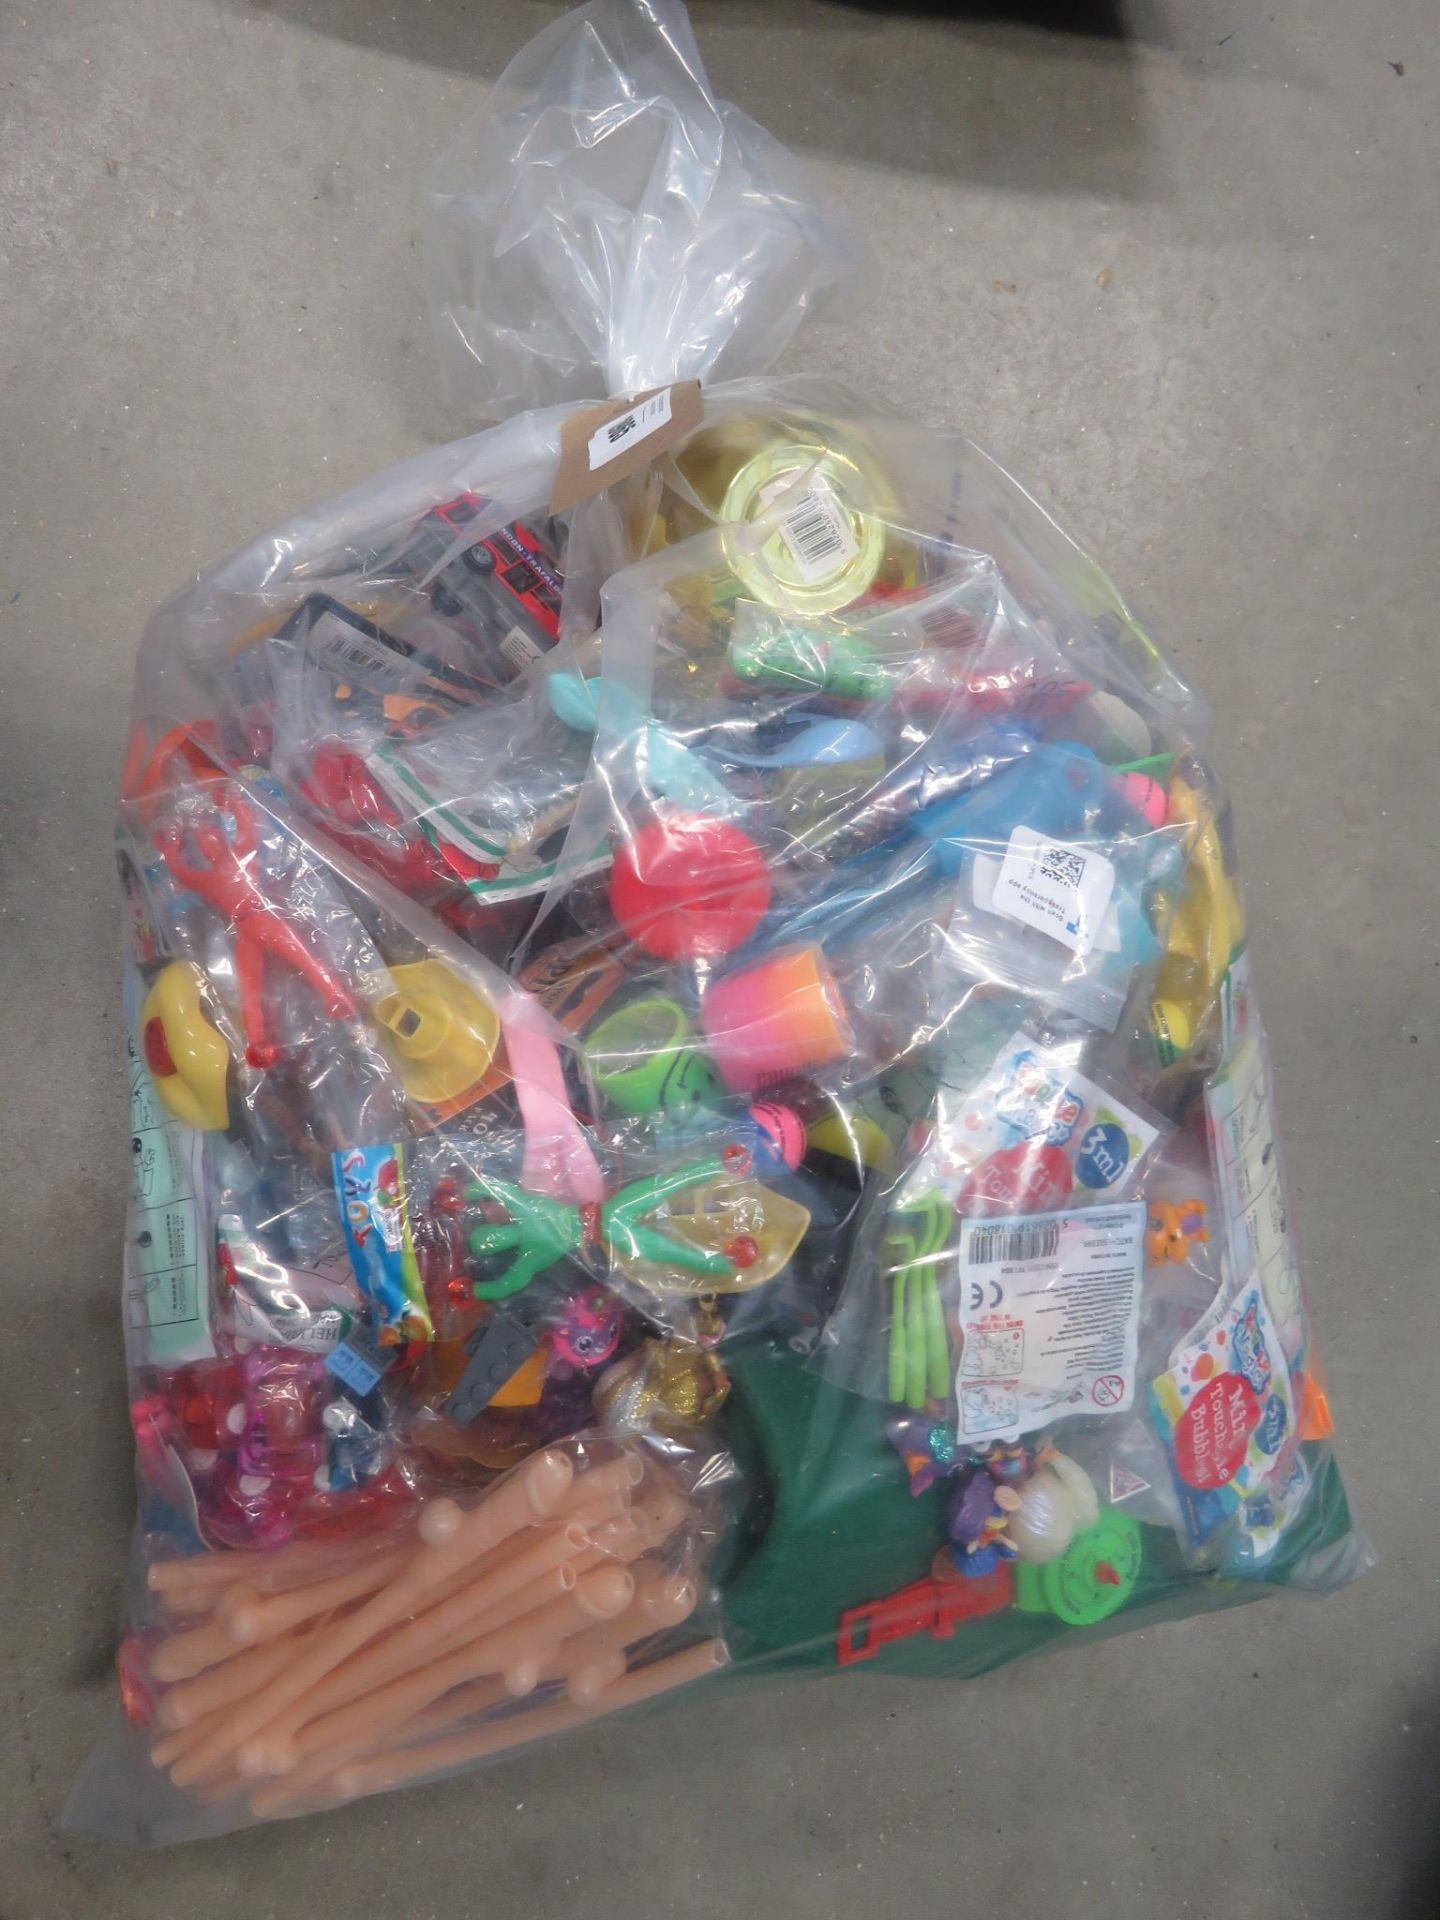 3510 Large bag of novelty toys, party bag fillers, building blocks, spooky spiders, bubbles etc